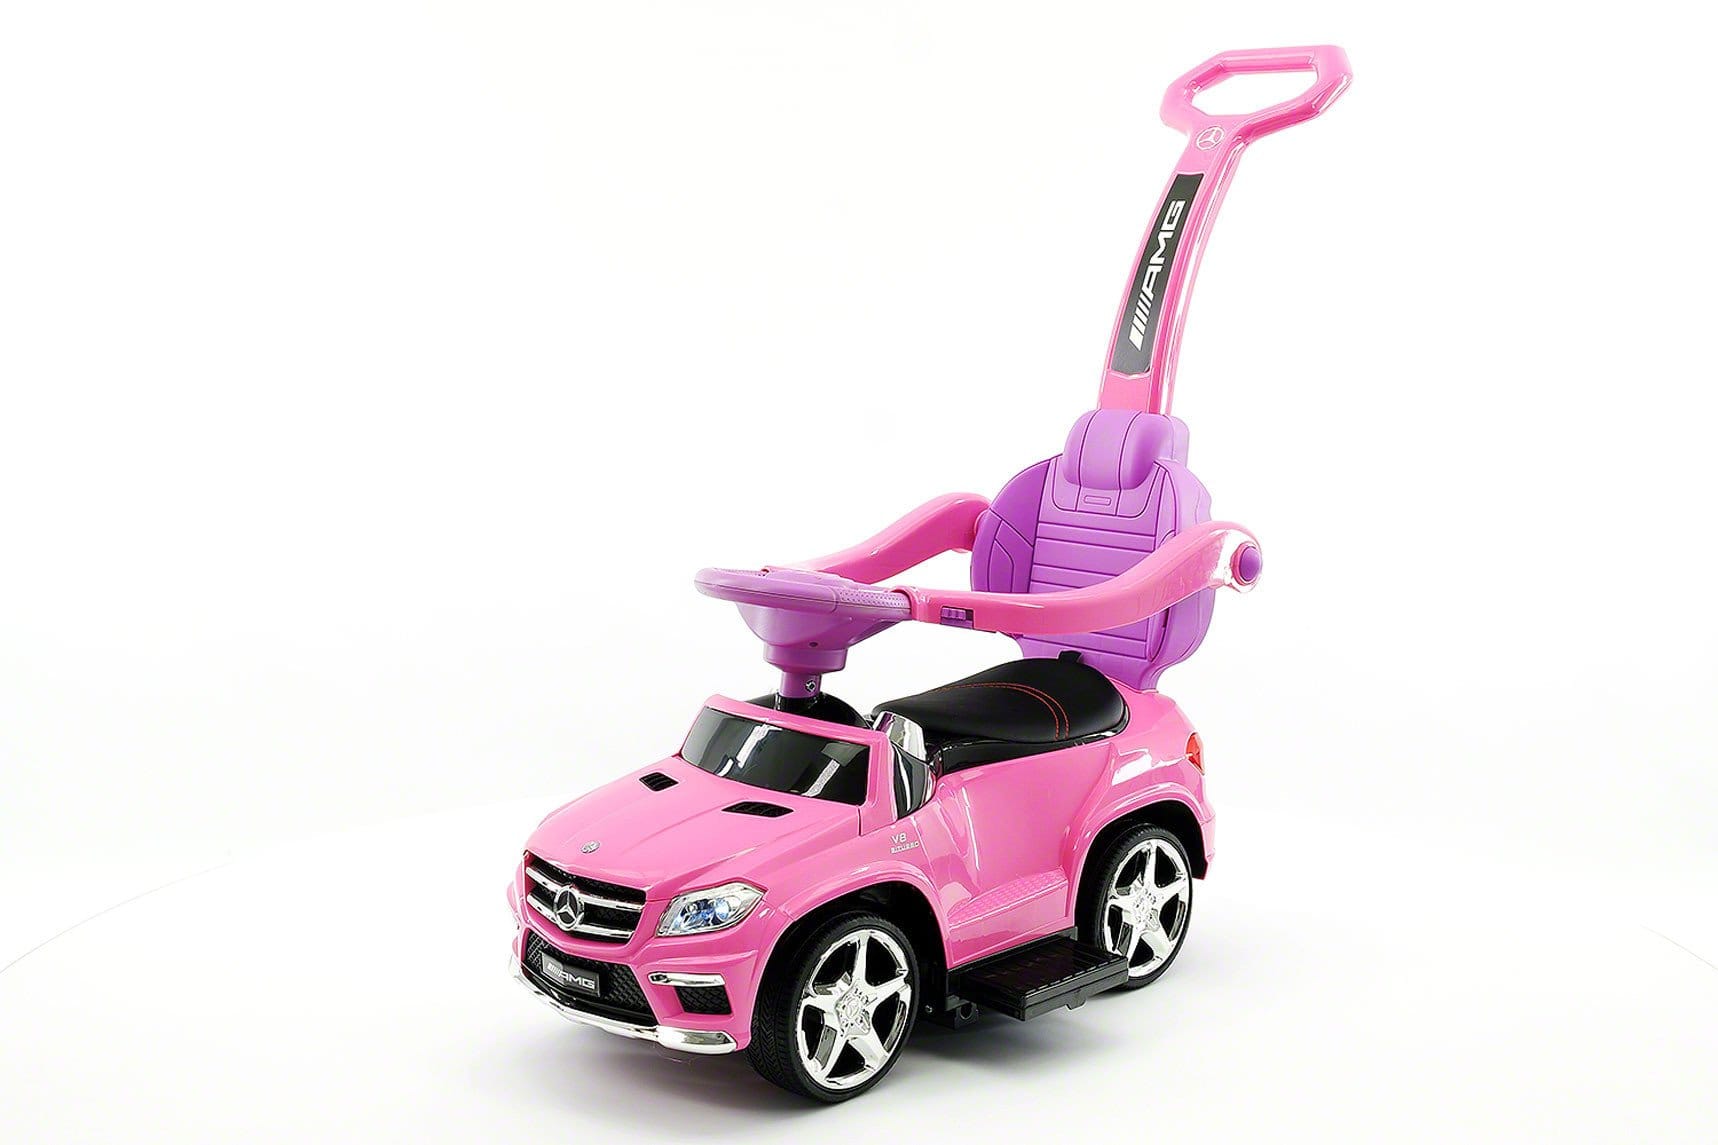 GTBW  Mercedes Benz Push Car Assorted - 4-in-1 push car looks just like a real Mercedes and functions as a stylish stroller, walker, push car or rocker. - 1578S ASST GL63AMG